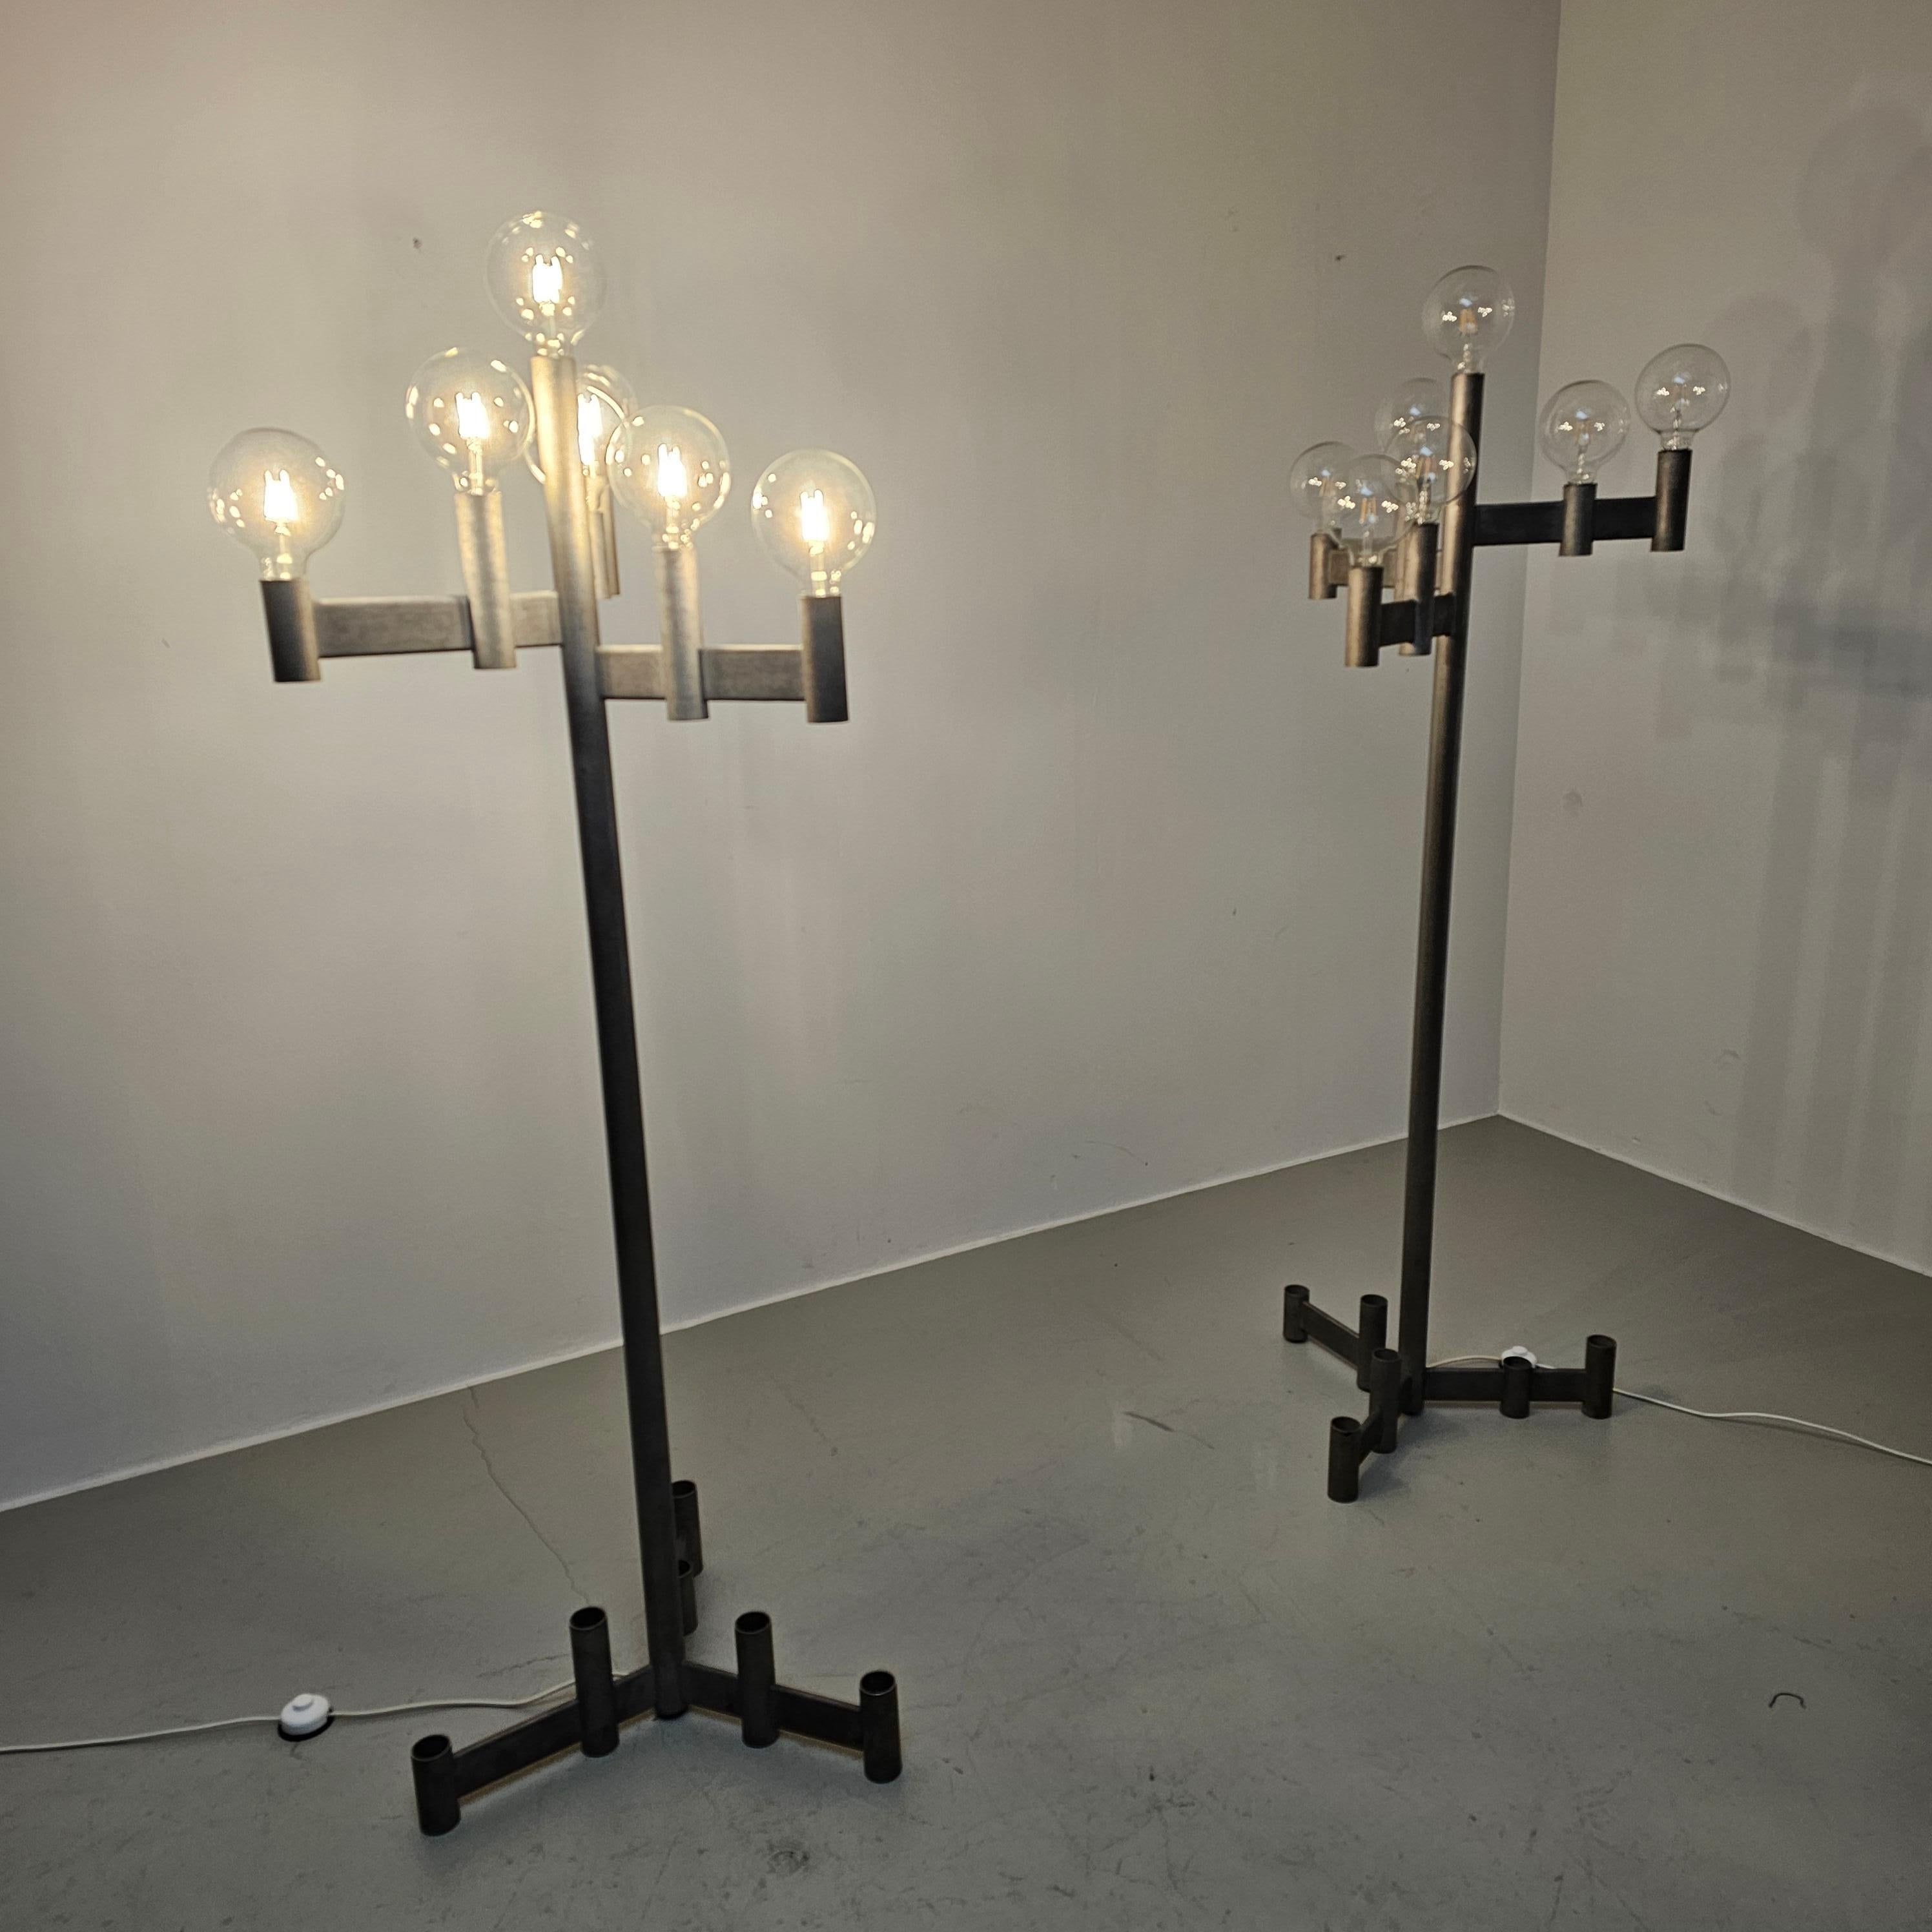 Set of 2 galvanized metal floor lamps. Brutalist style. These lamps were part of a church interior.
The lamps are made of hollow metal galvanized pipes.
The lamps used for the picture are 470 lumen each.

Both lamps are checked and rewired. Please